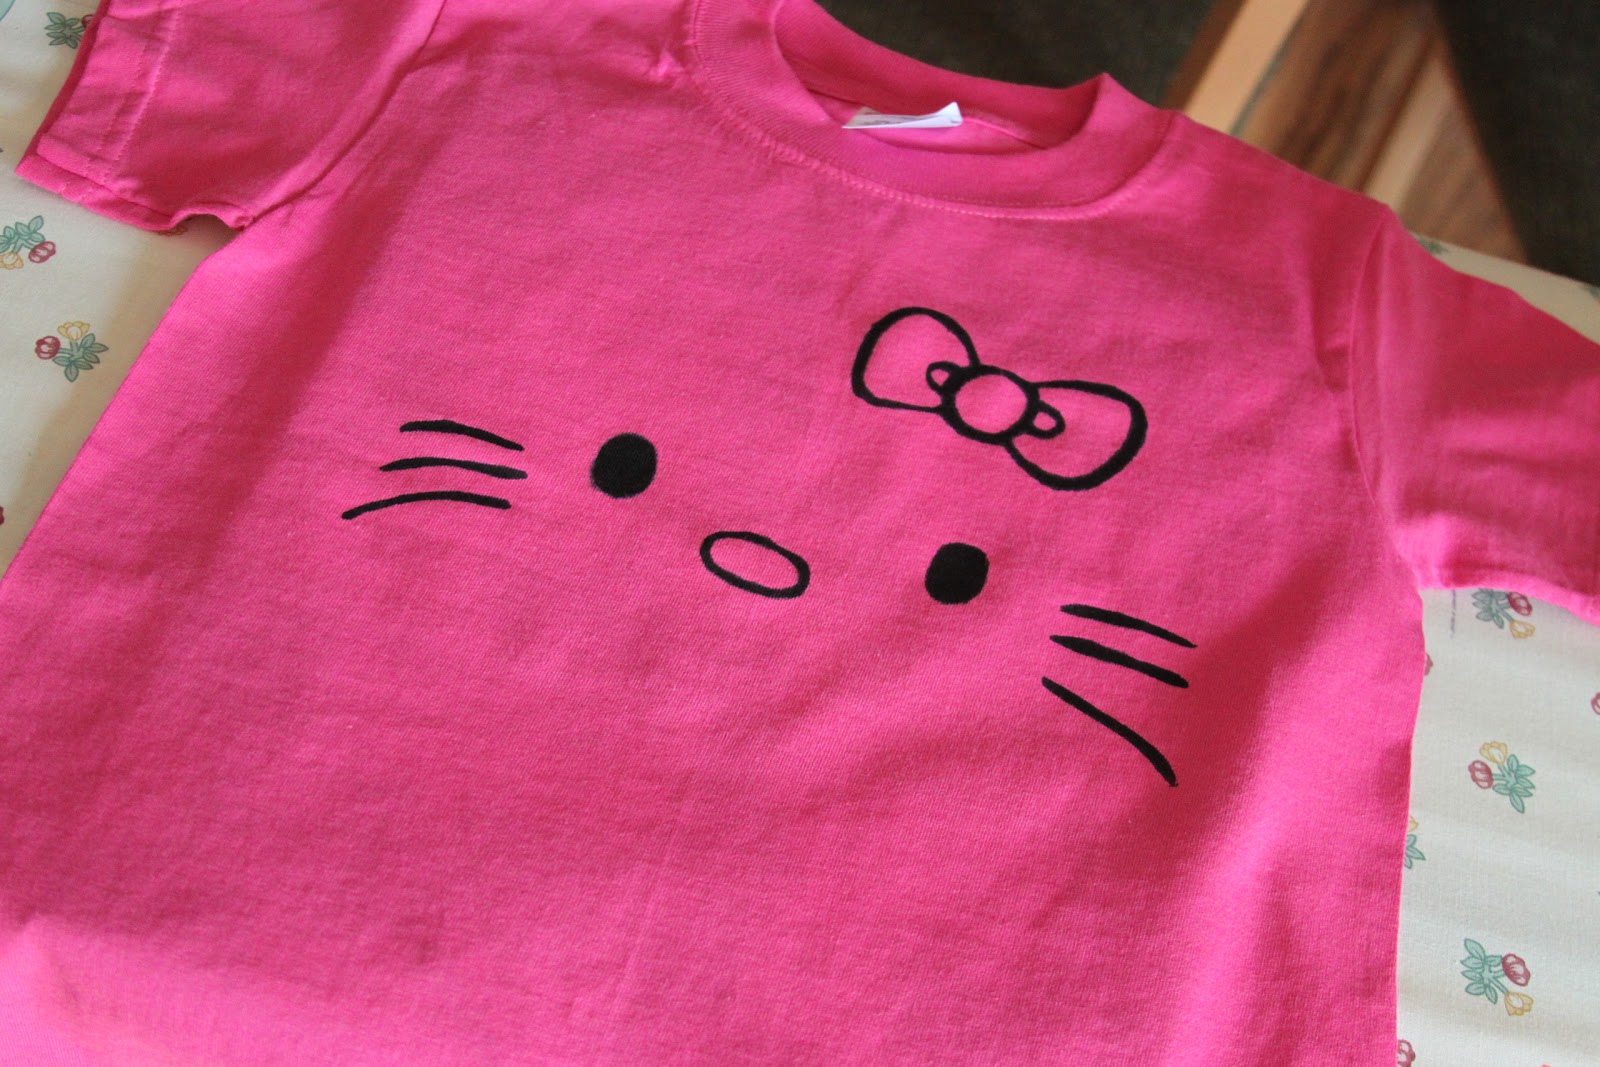 hello kitty first birthday outfit